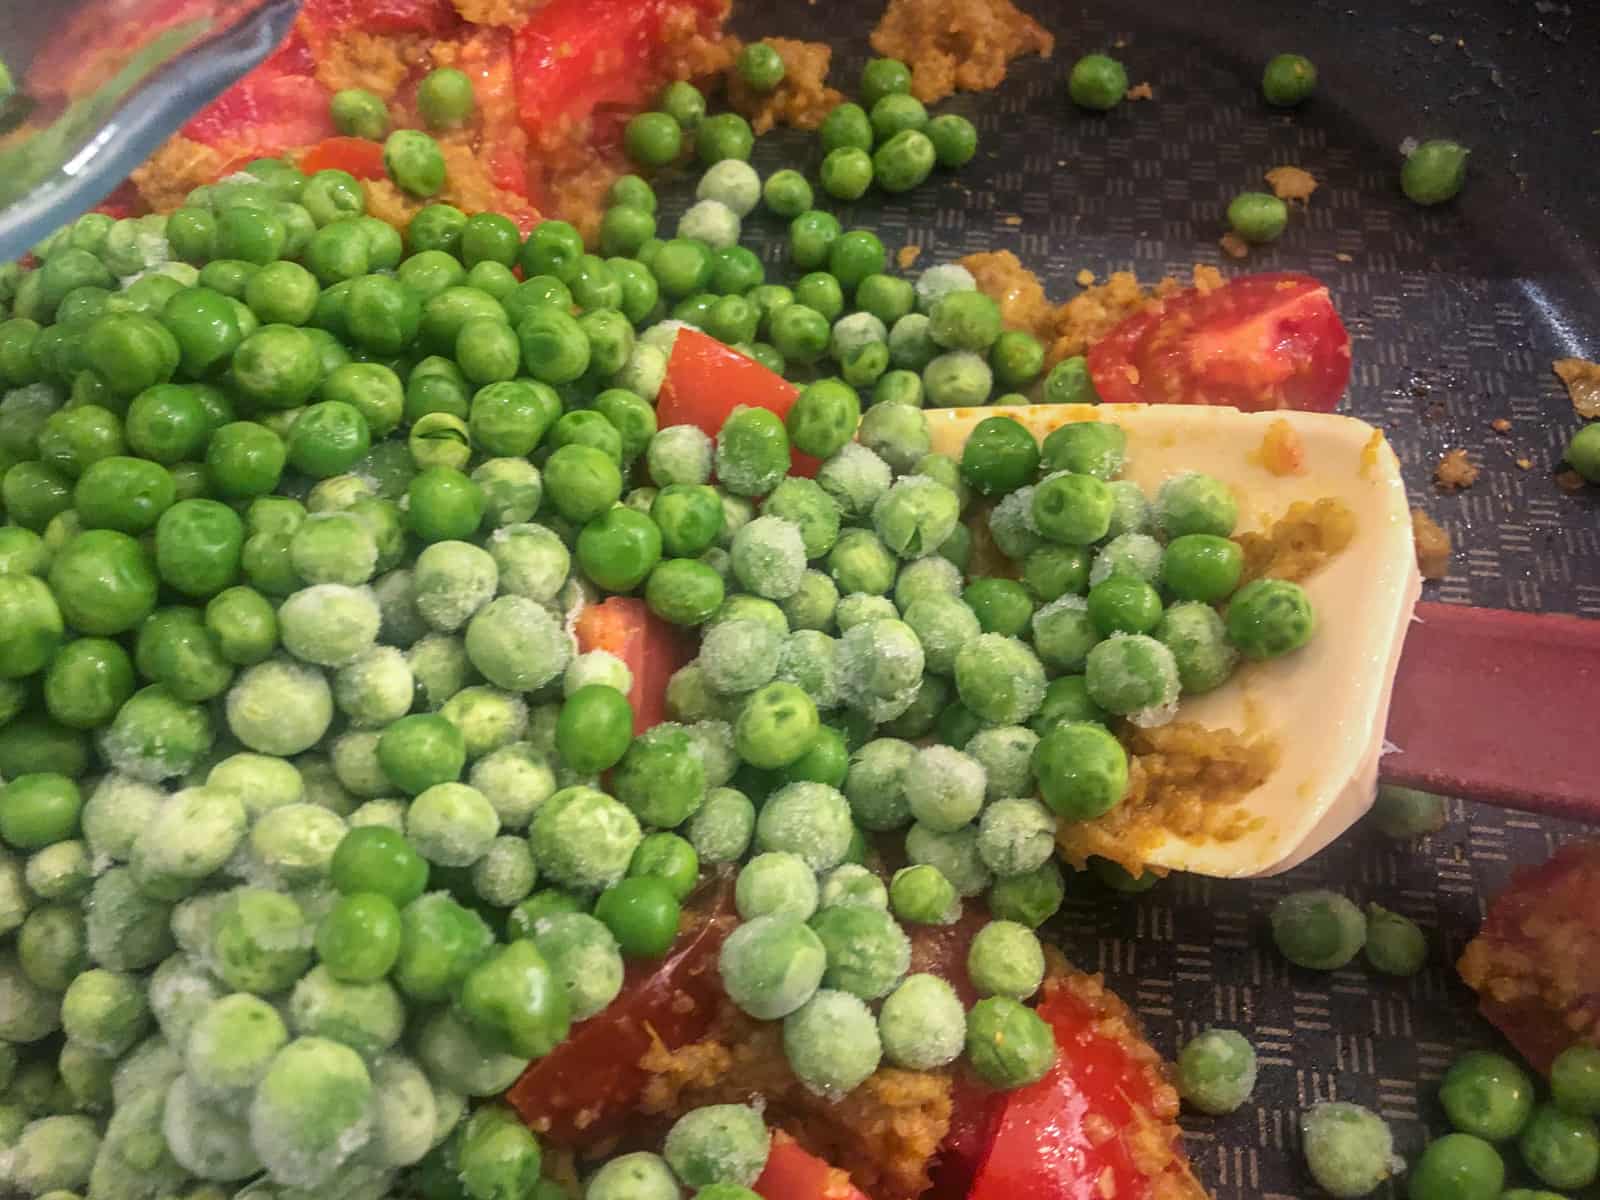 Frozen peas added to a curry paste and tomatoes in a skillet.